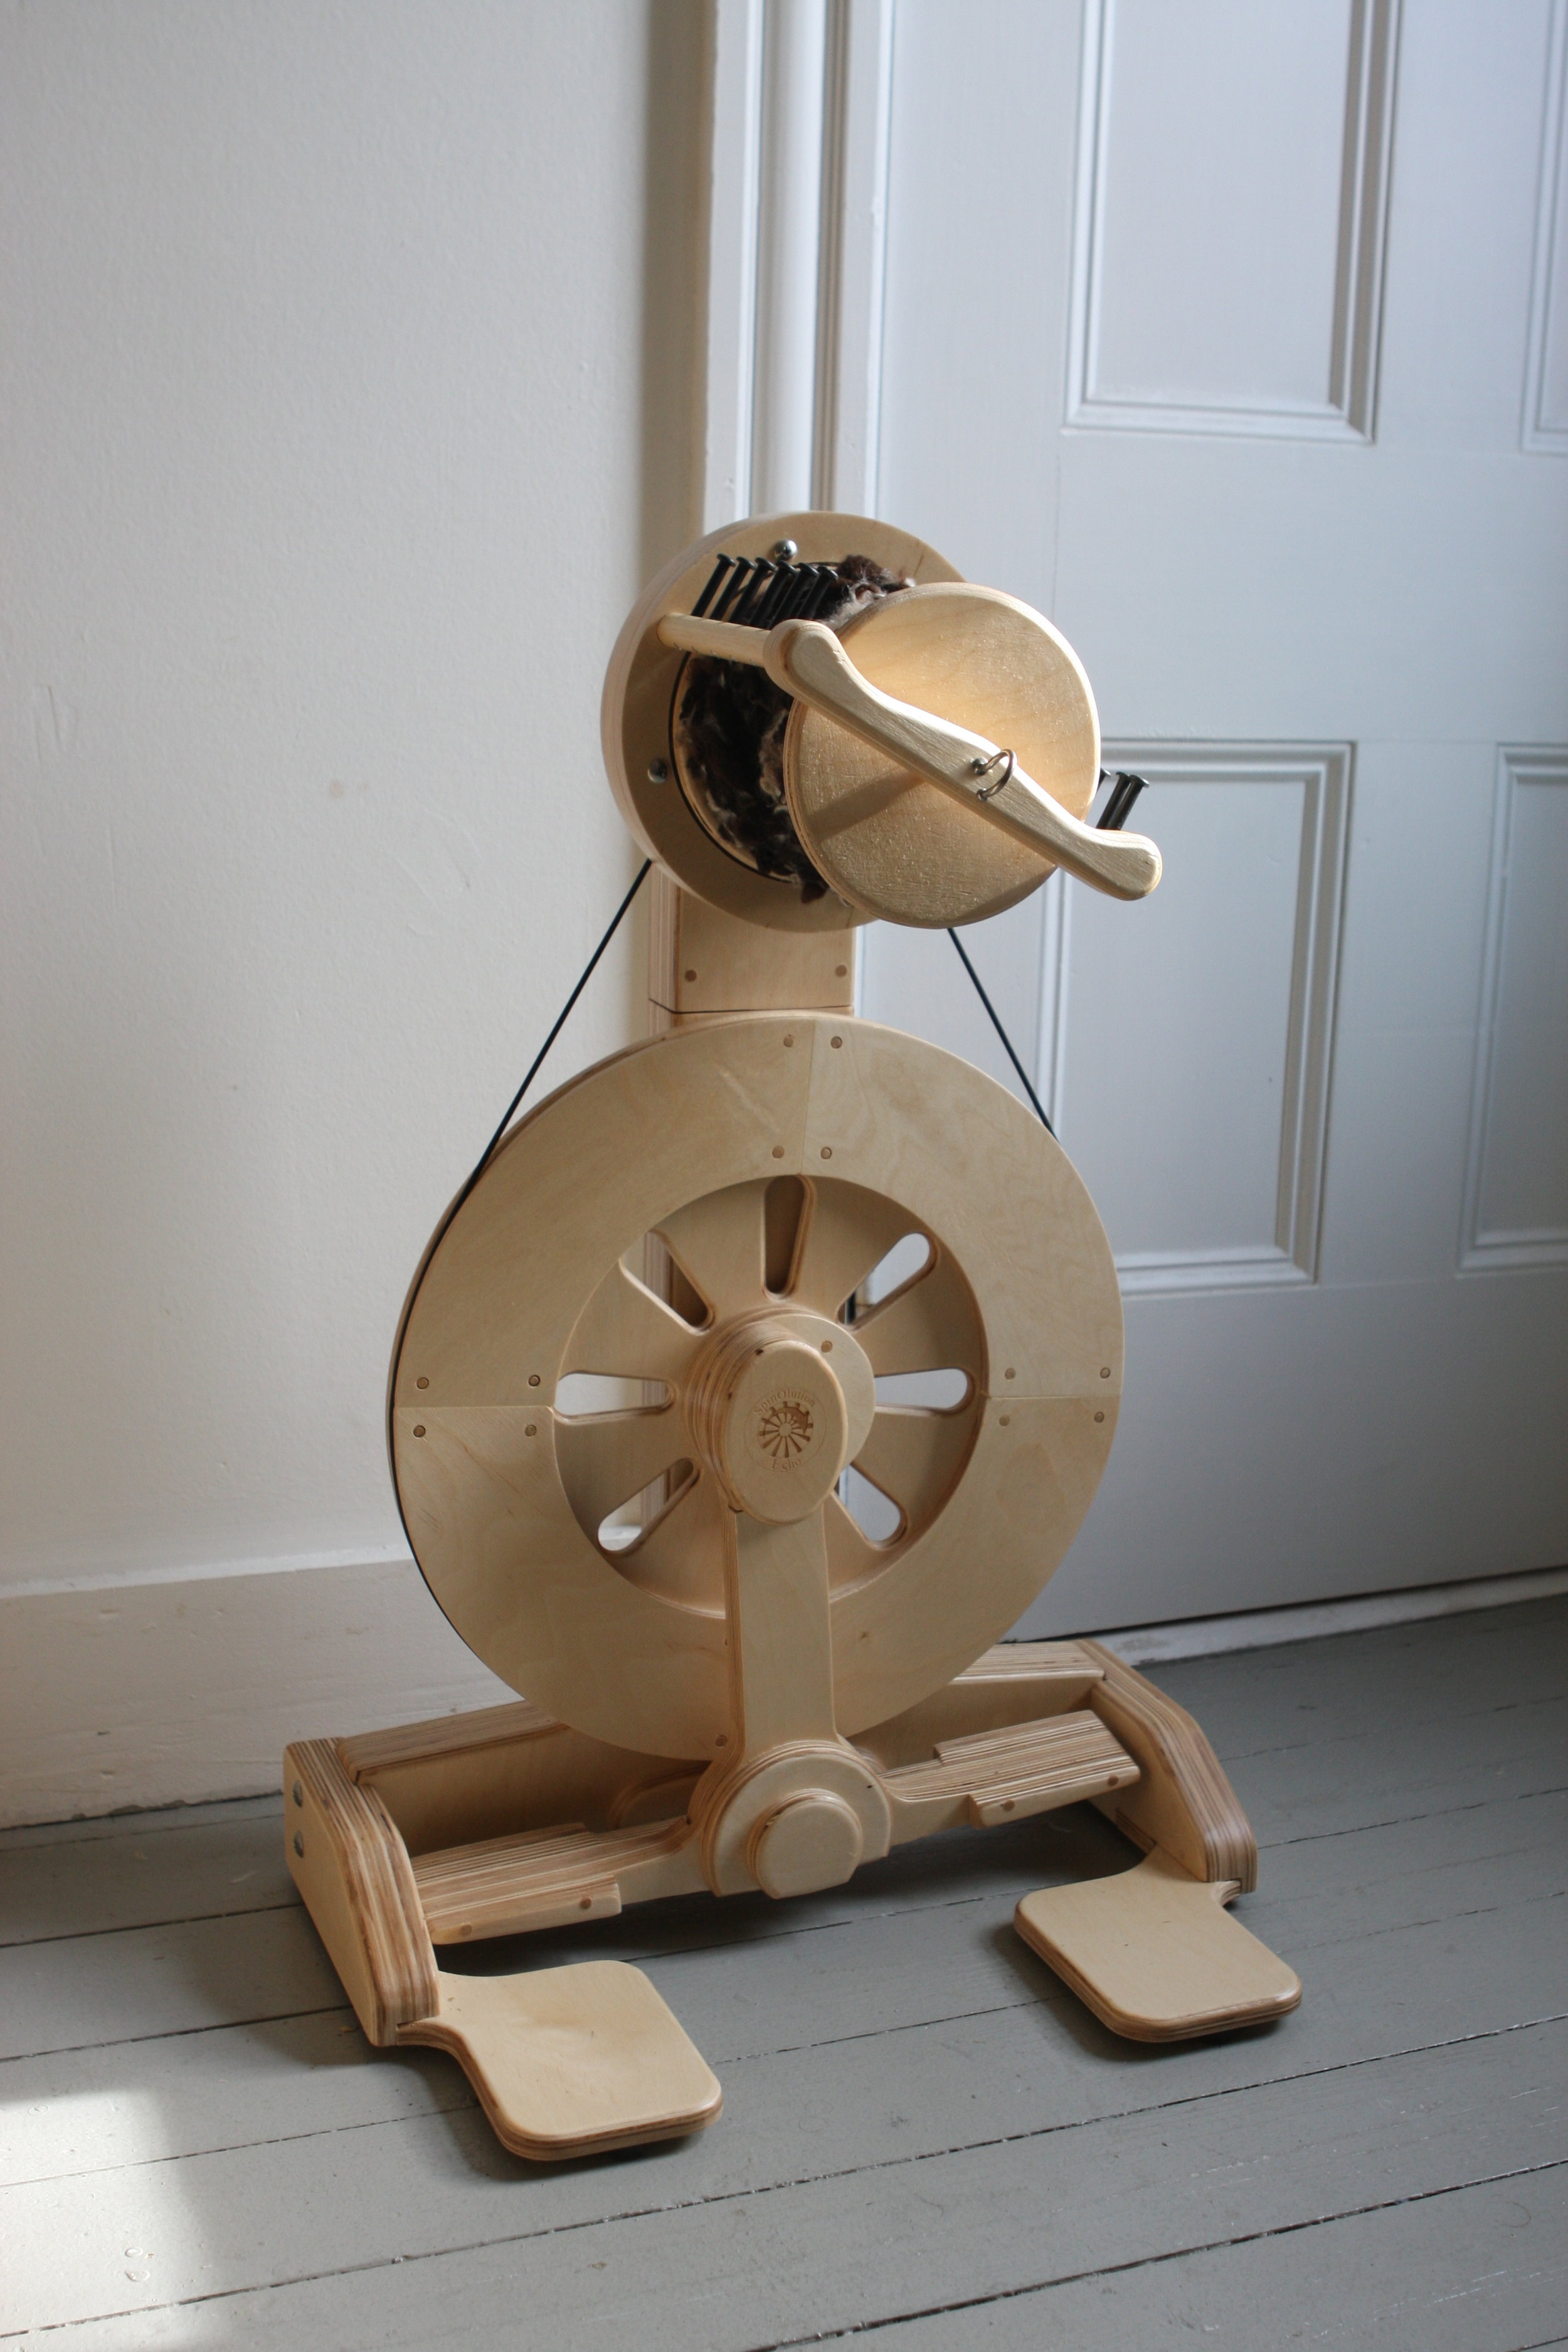 SpinOlution Spinning Wheels: Bullfrog Portable Bulky Art Yarn Spinning Wheel  — SpinOlution Spinning Wheels made in the Pacific Northwest, USA. Veteran  Owned.